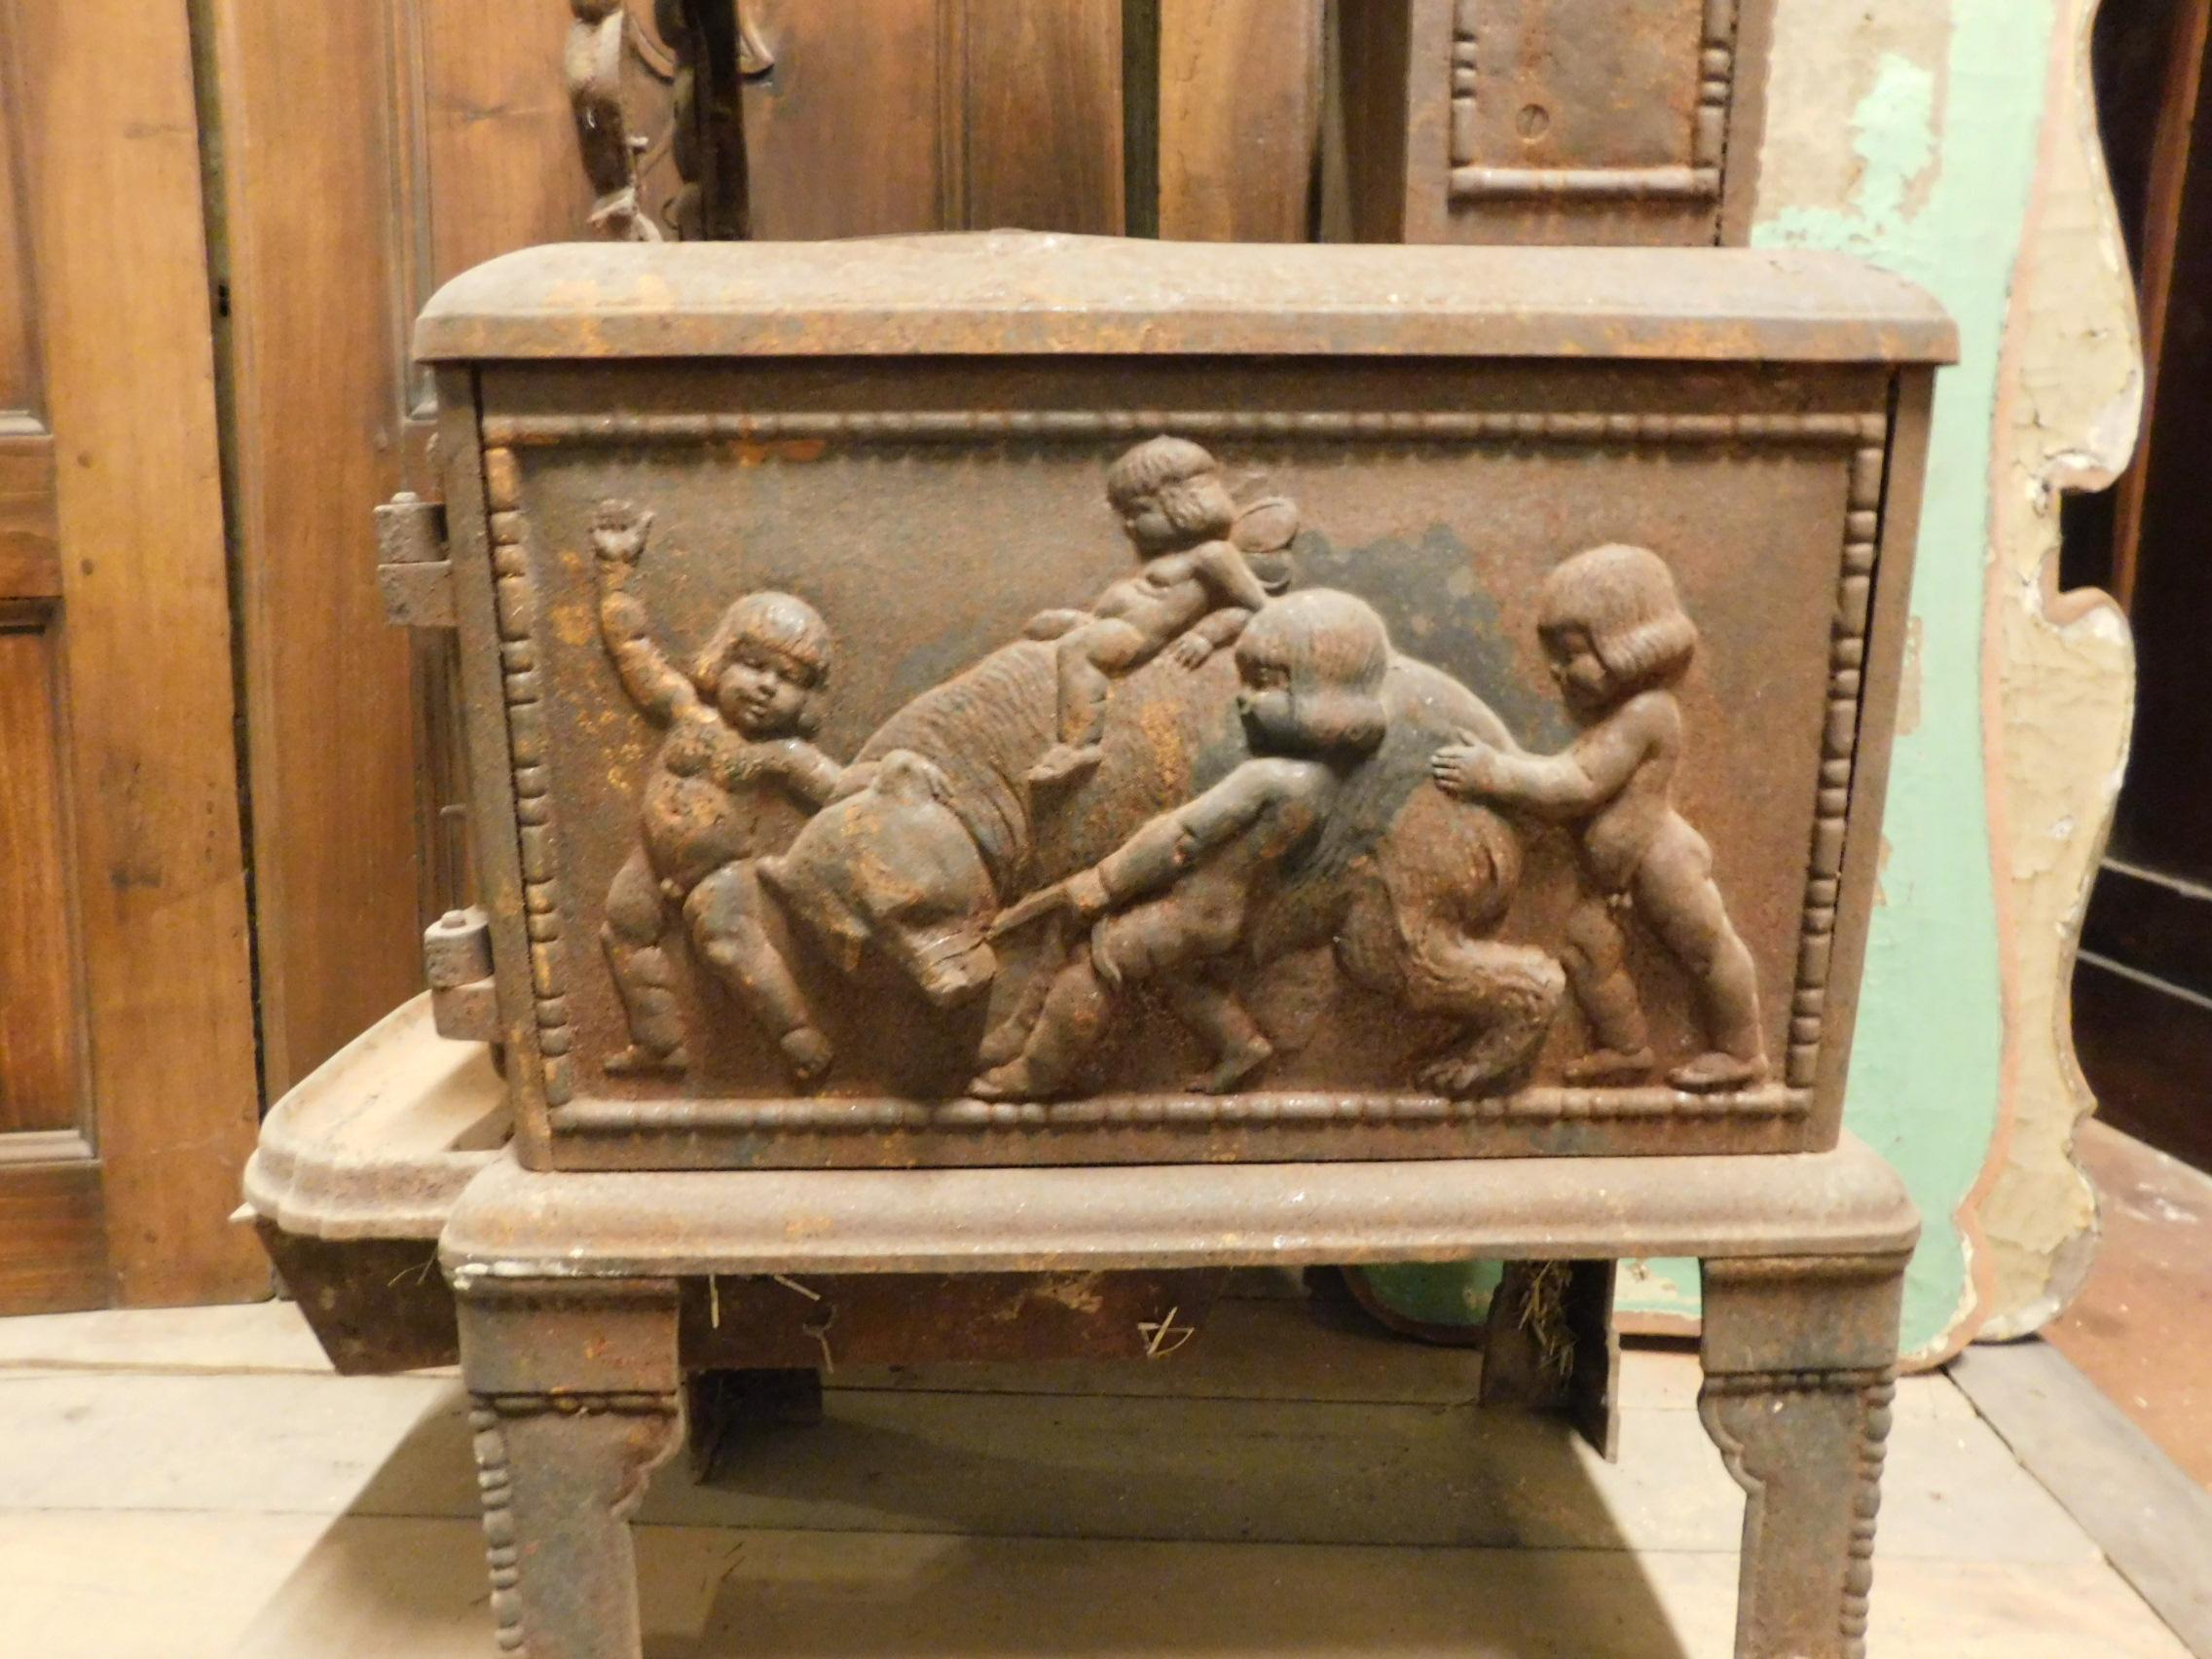 19th Century Antique Stove in Cast Iron, Wood-Burning, Decor on All Sides Cherubs, 1800